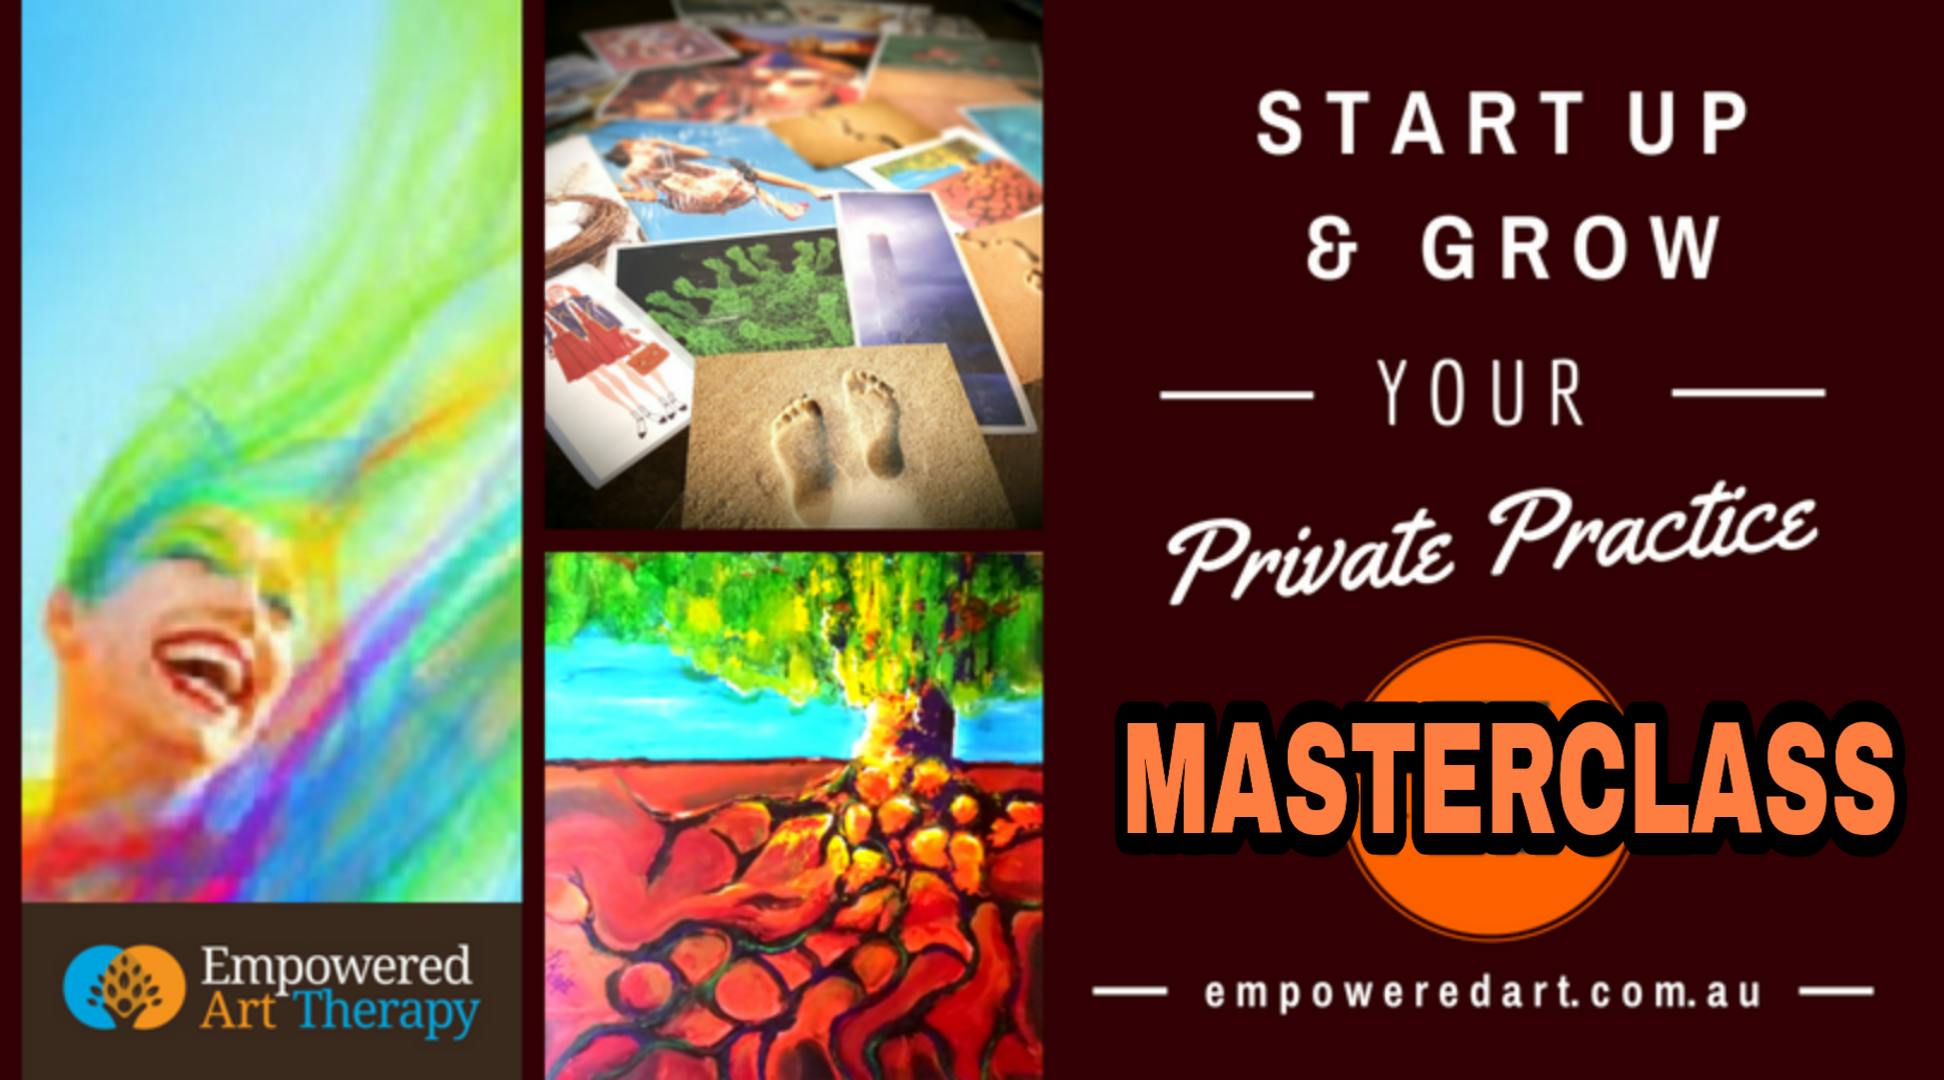 START UP & GROW Your Private Practice | Day 2 of 3 Masterclass Program